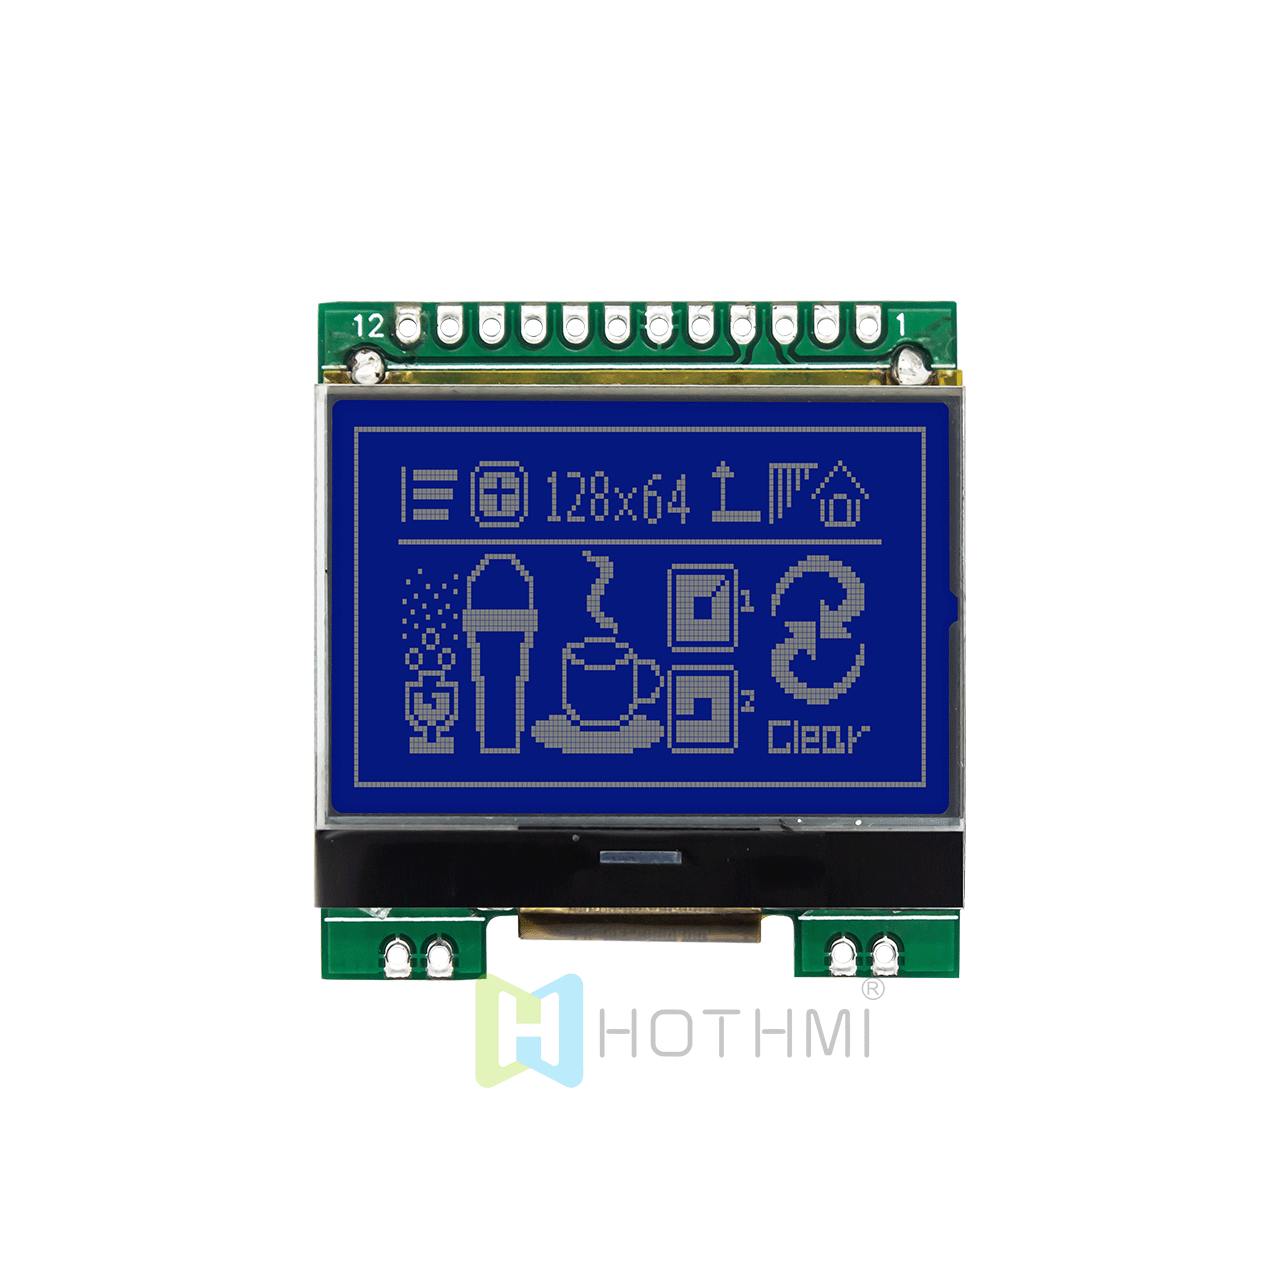 1.7"LCD1264 LCD screen/LCM128x64 graphic dot matrix module/blue background with white characters/ST7567/SPI/1.7 inch